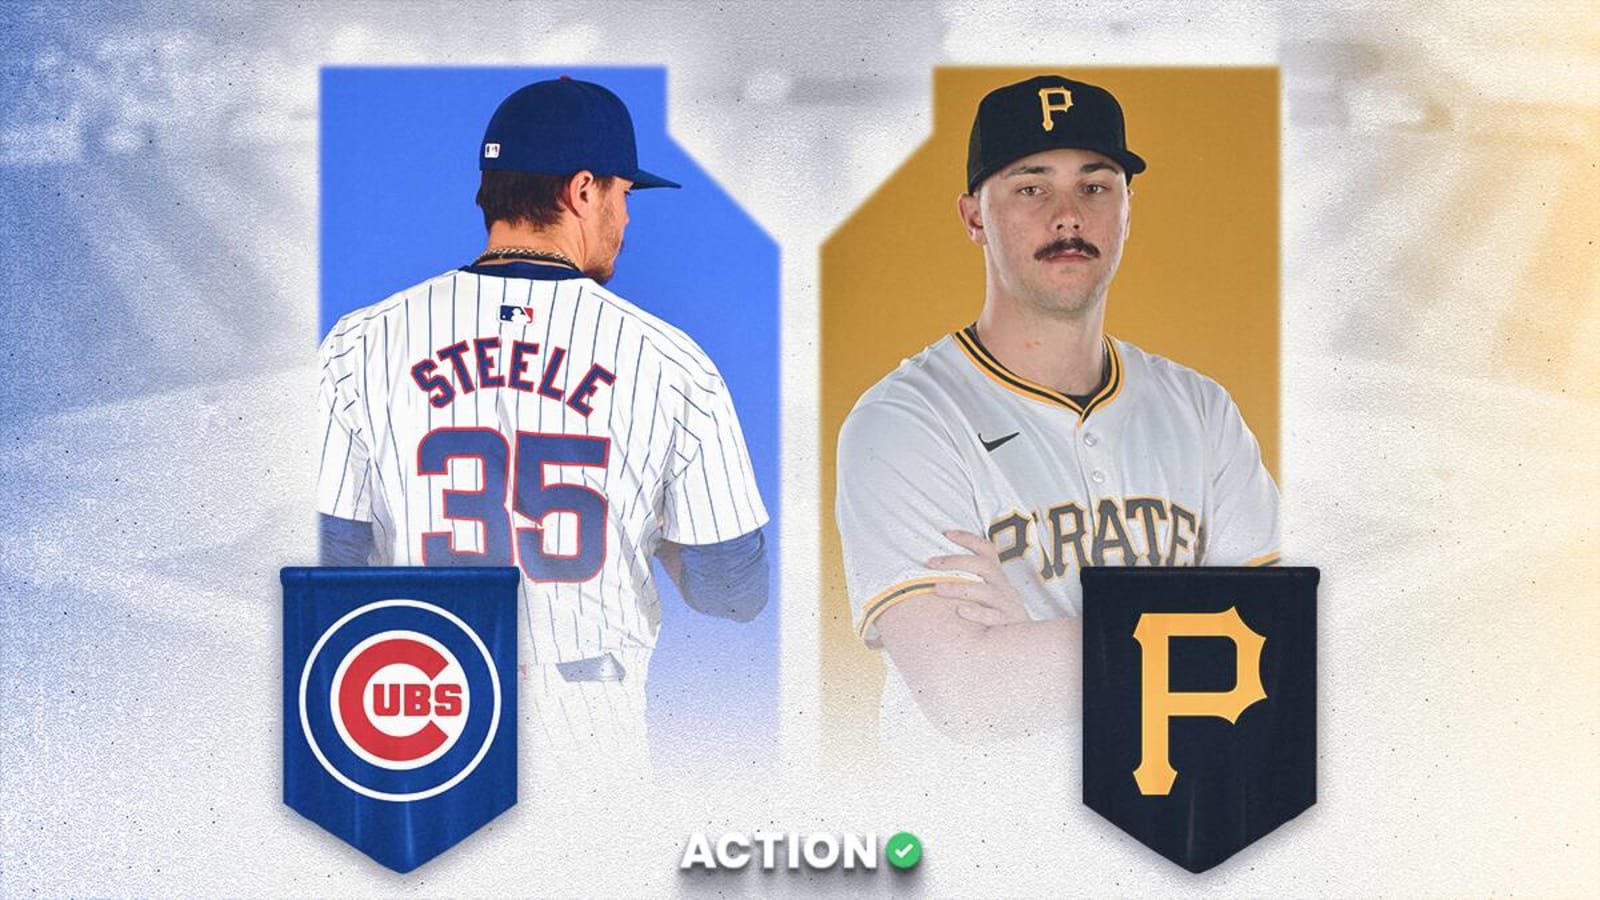 Cubs vs. Pirates odds, prediction, pick for 5/11: Bet the Under in Skenes' debut?